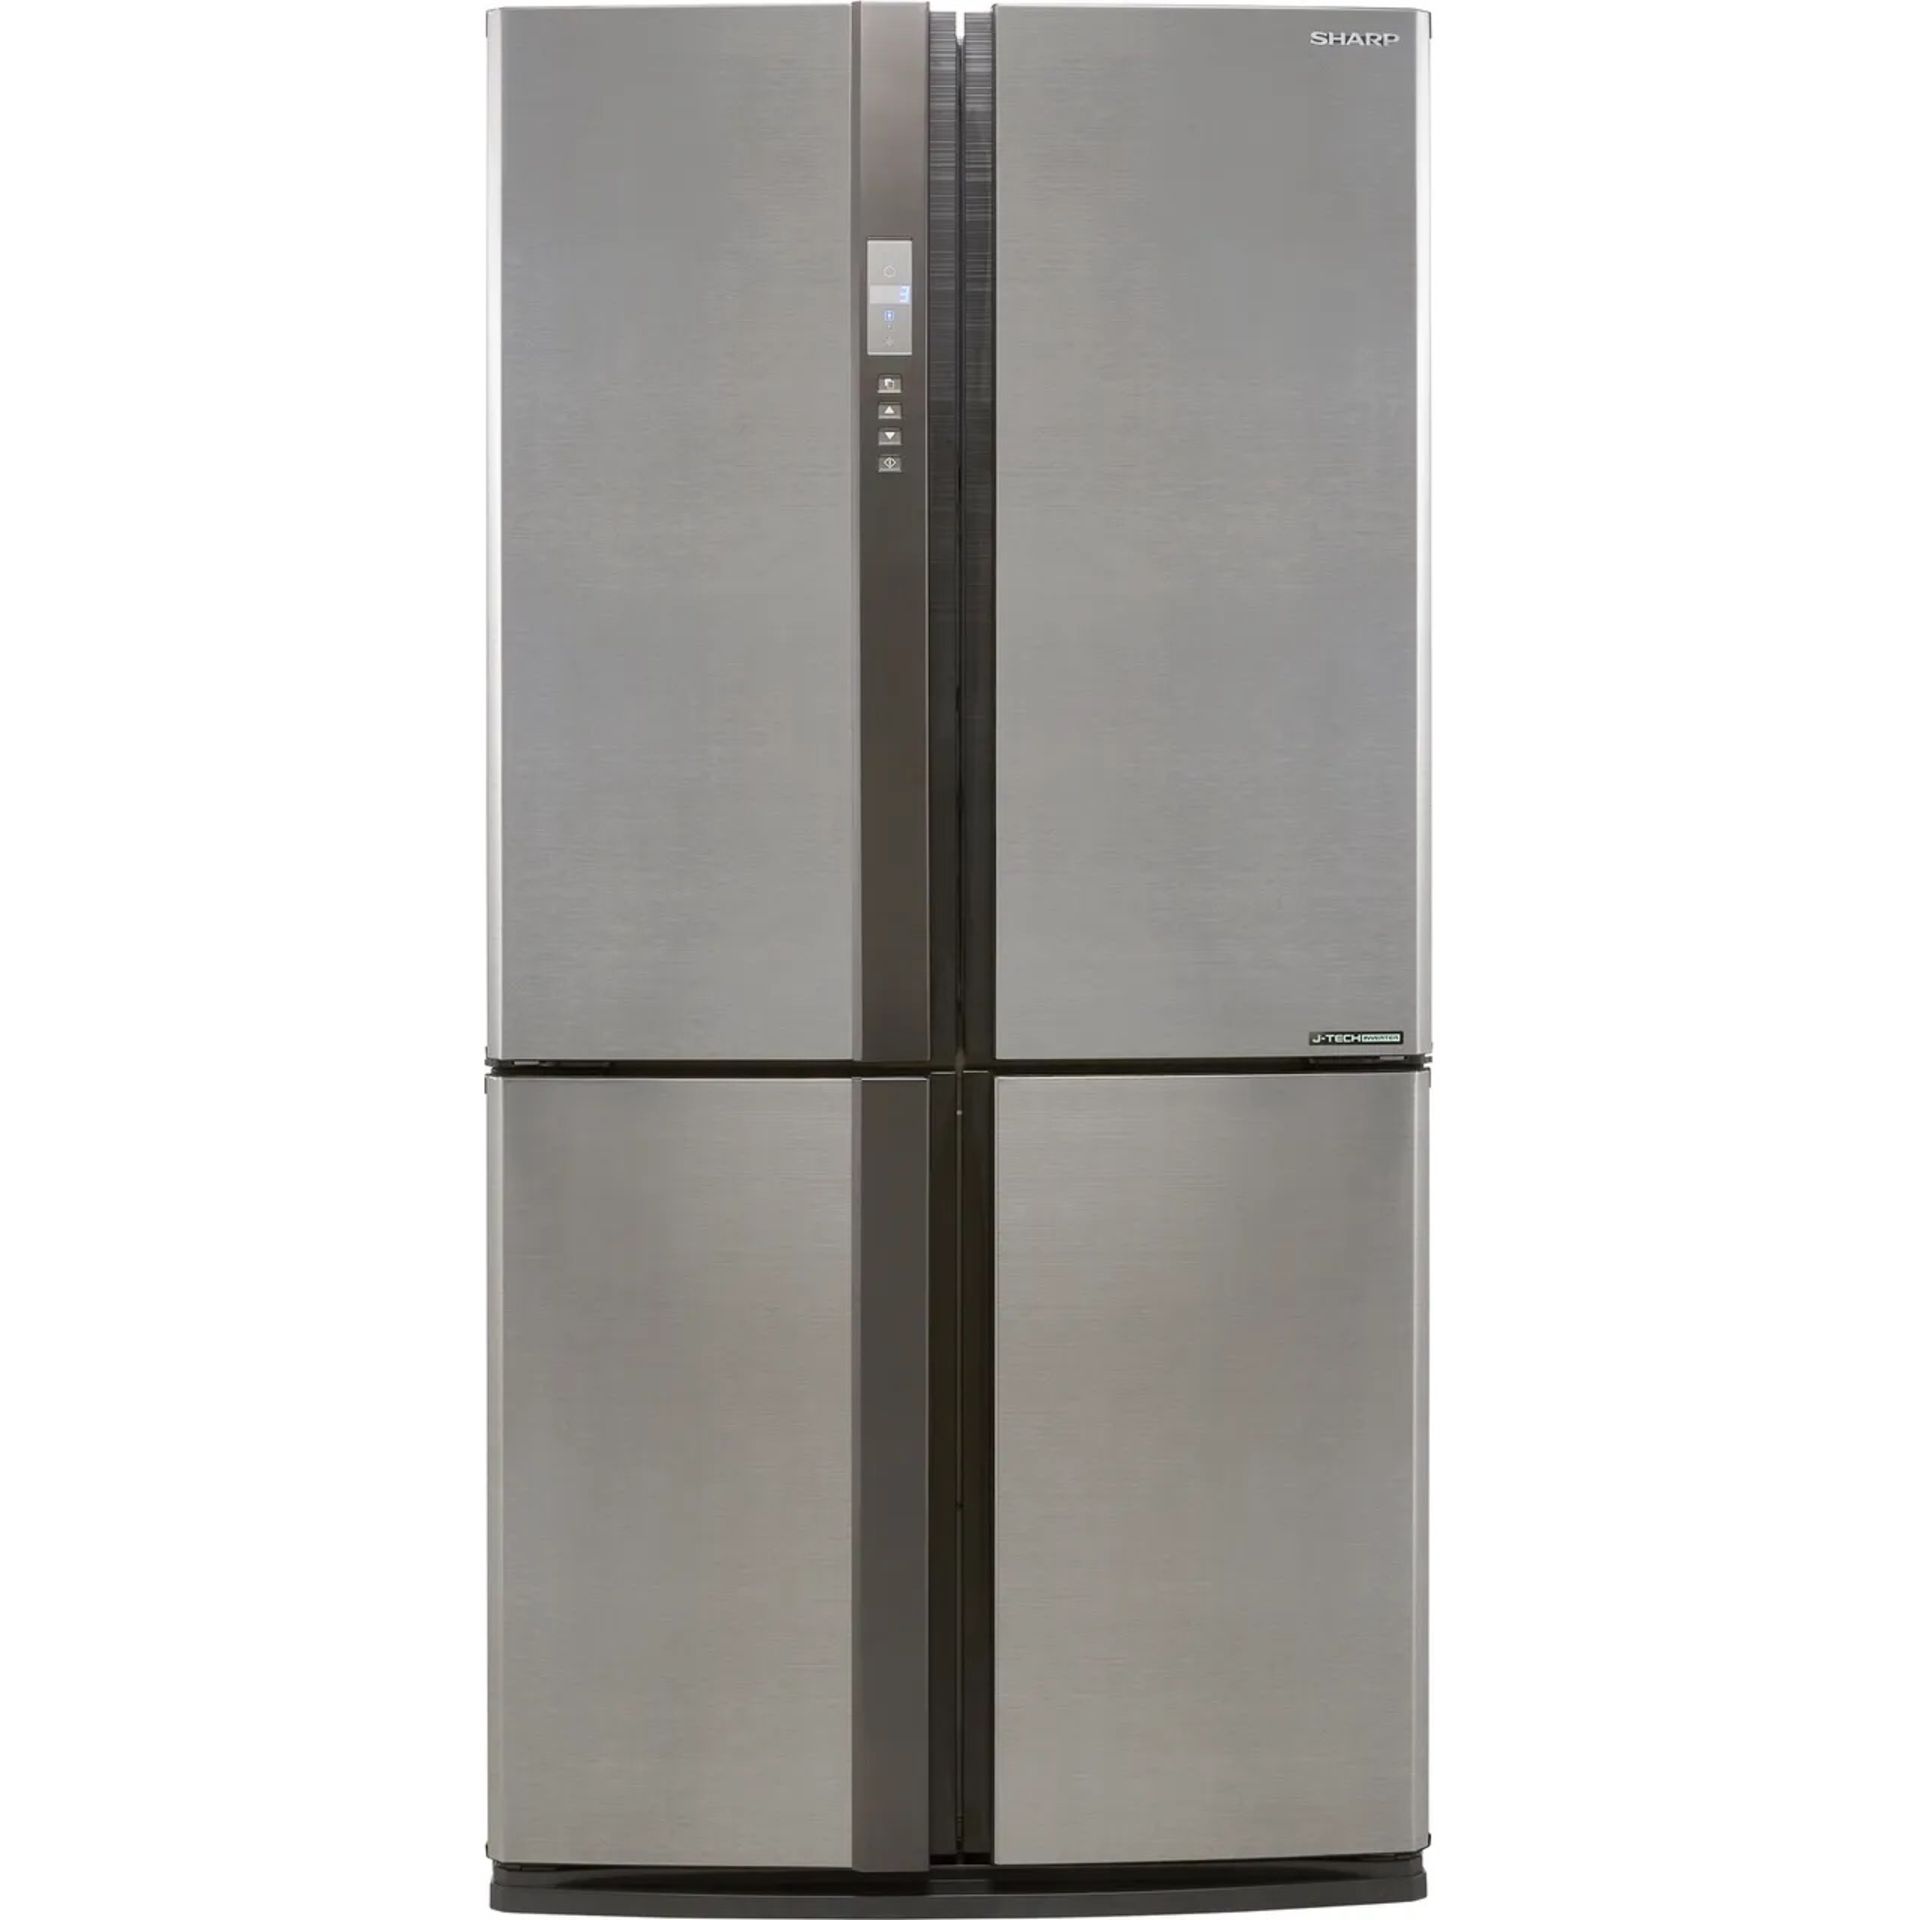 Sharp 4 door American fridge freezer, getting cold in both compartments when plugged in, has a